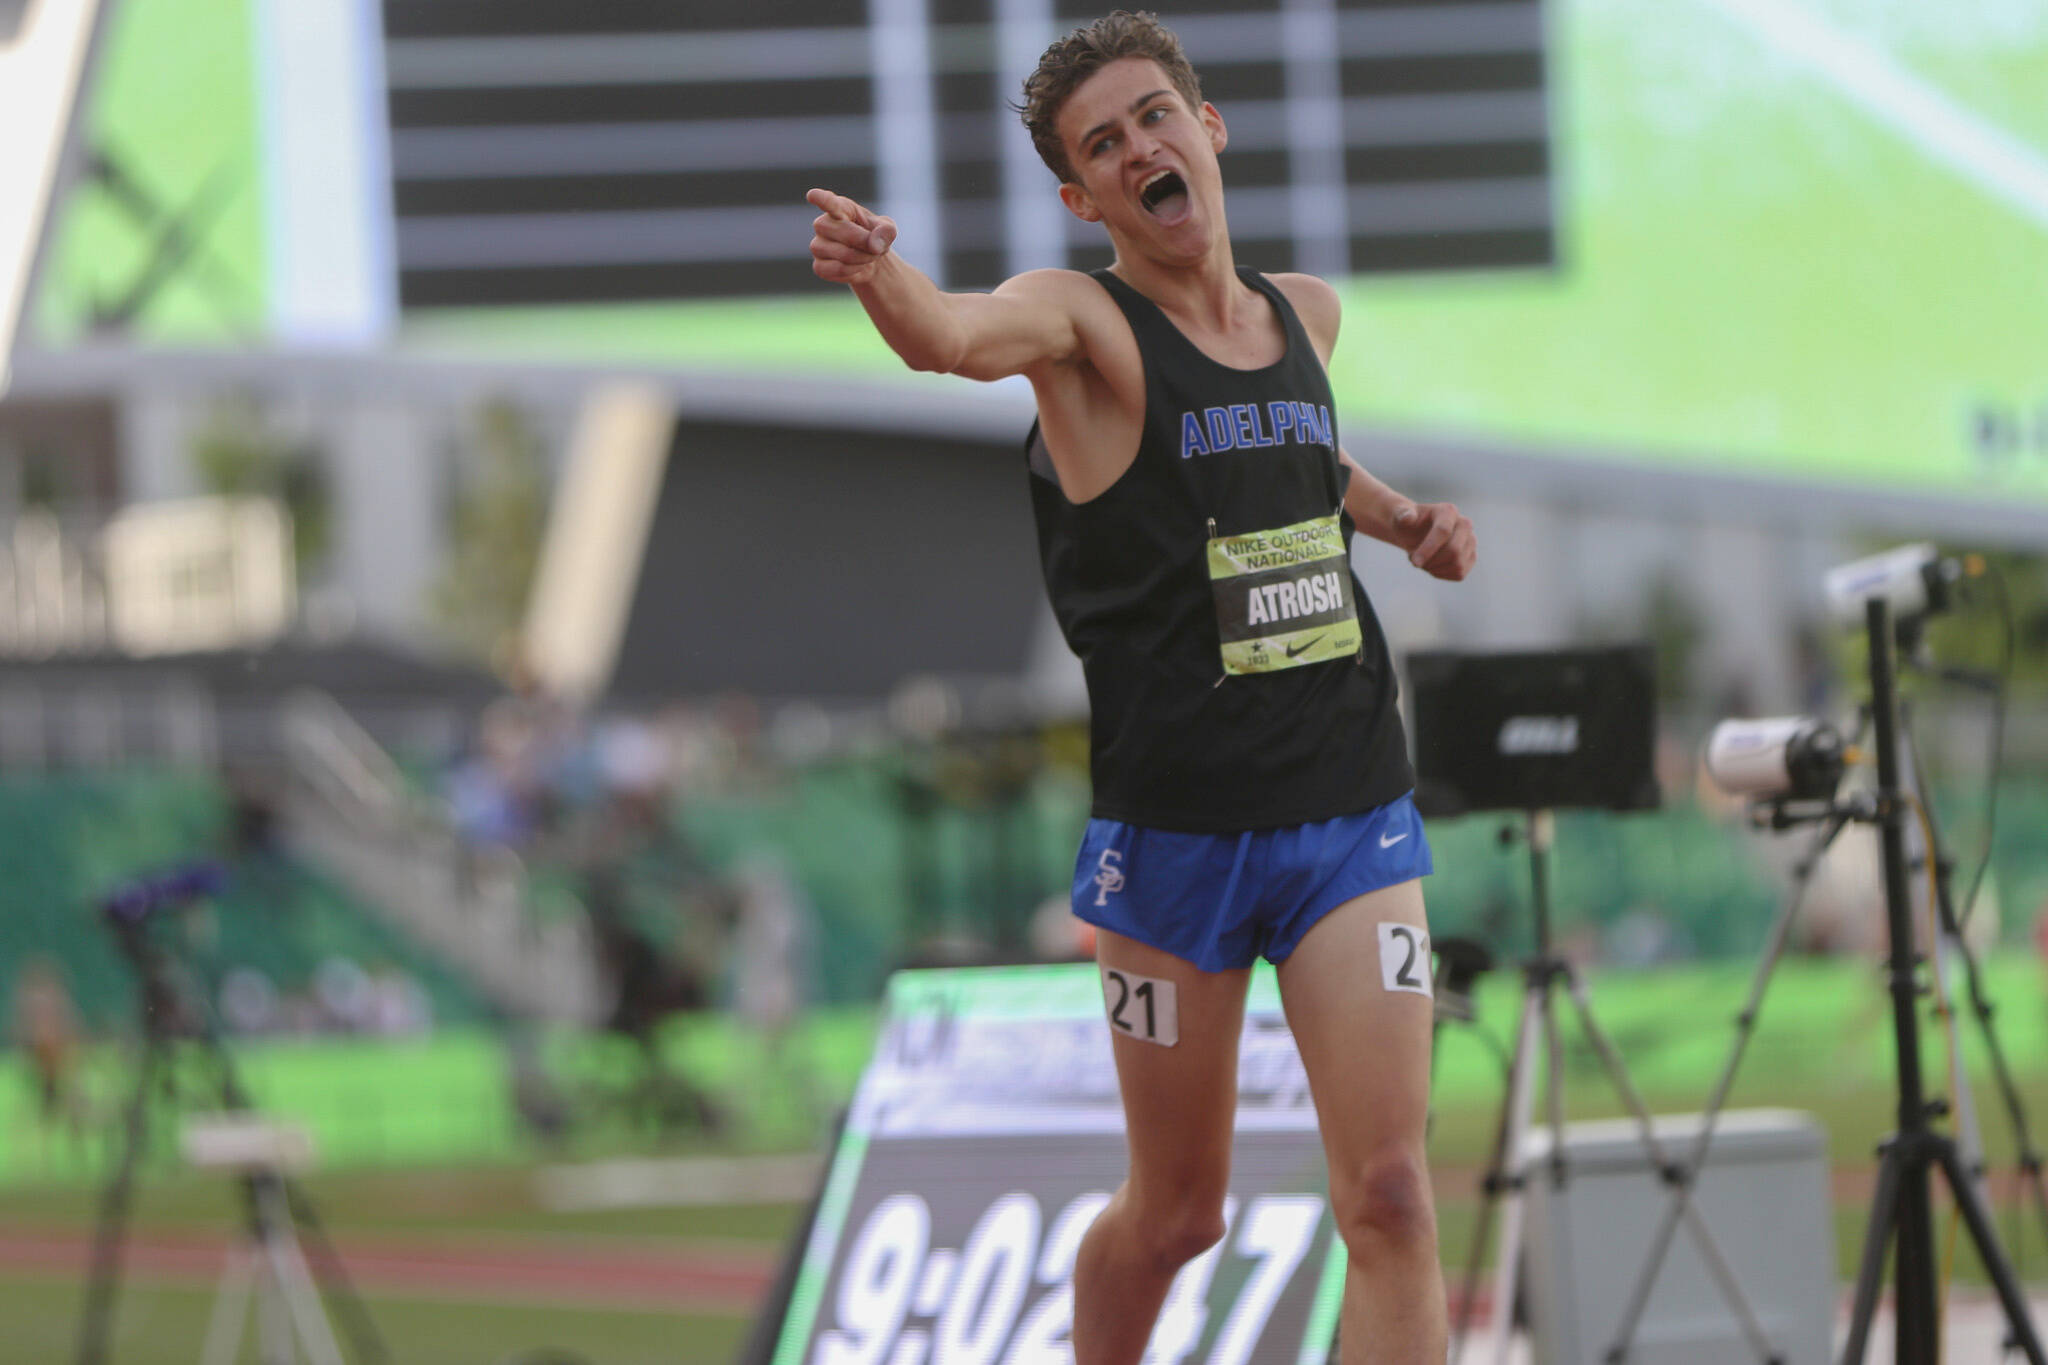 Mercer Islander Hudson Atrosh excitedly crosses the finish line in first place in the Emerging Elite two-mile race on June 14 at the Nike Outdoor Nationals at Hayward Field in Eugene, Oregon. Photo courtesy of westcoastxc